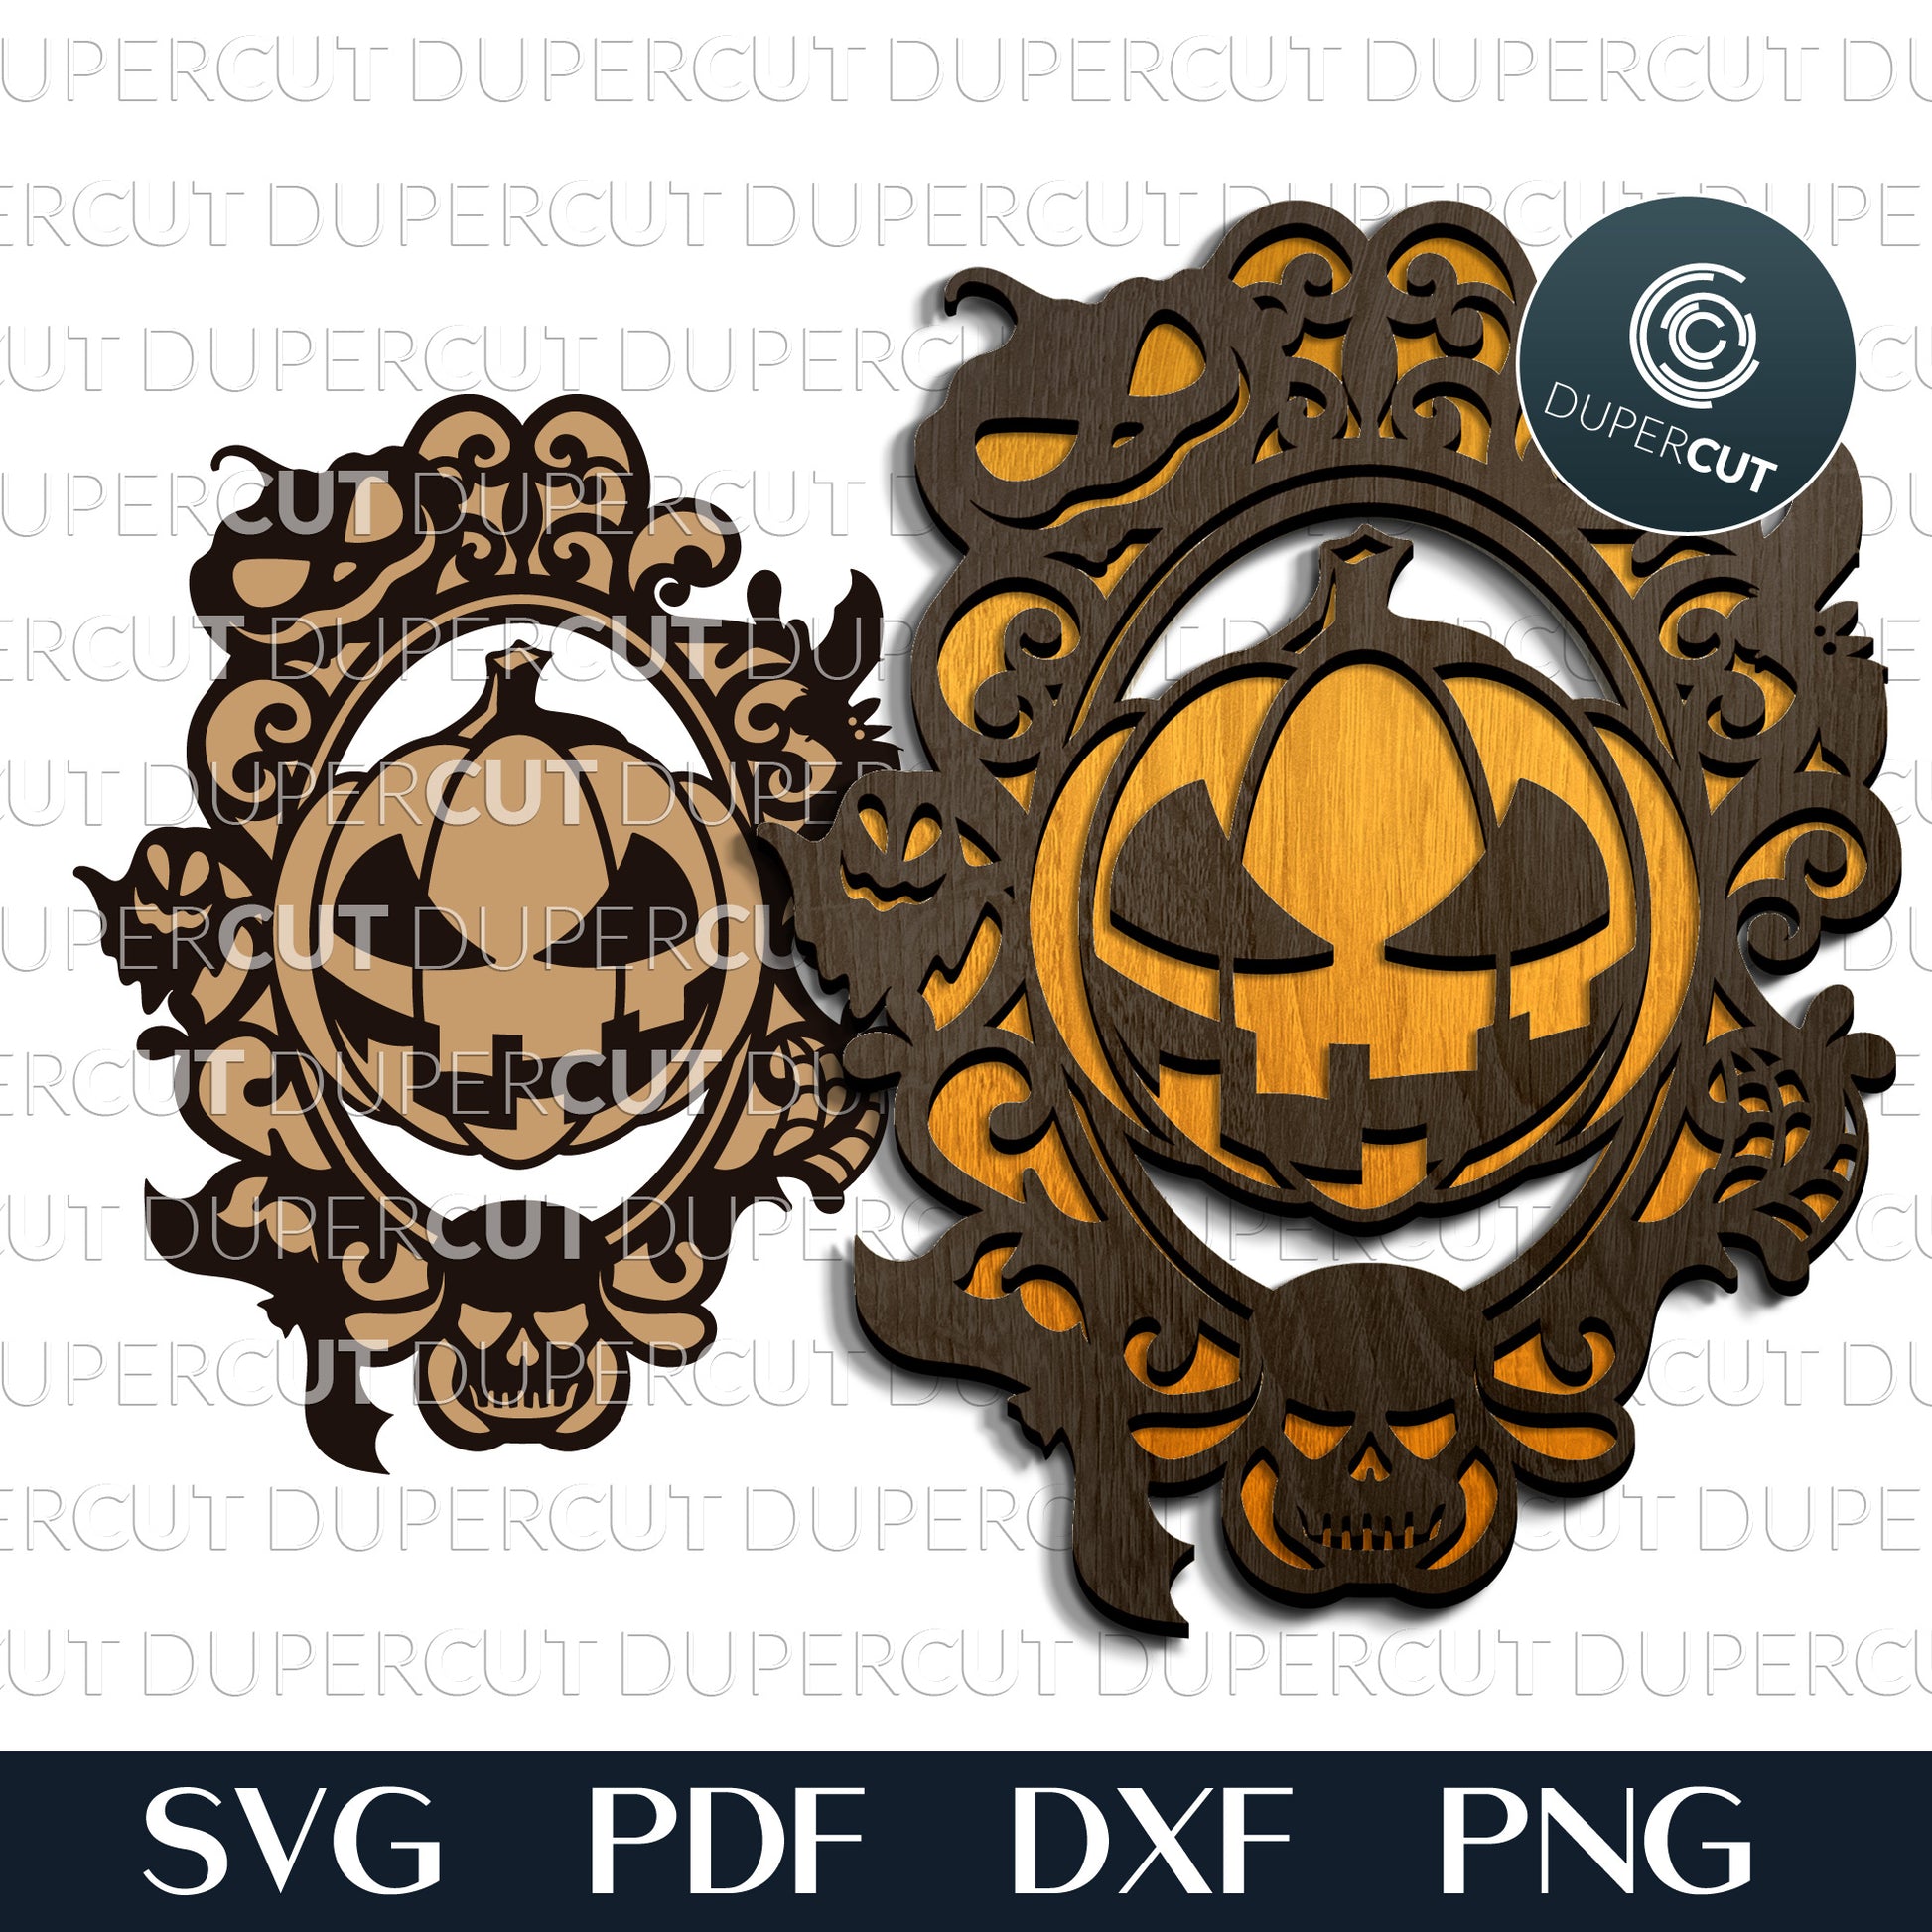 Halloween pumpkin frame - SVG DXF PNG layered cutting files for Glowforge, Cricut, Silhouette Cameo, CNC plasma laser machines by DuperCut